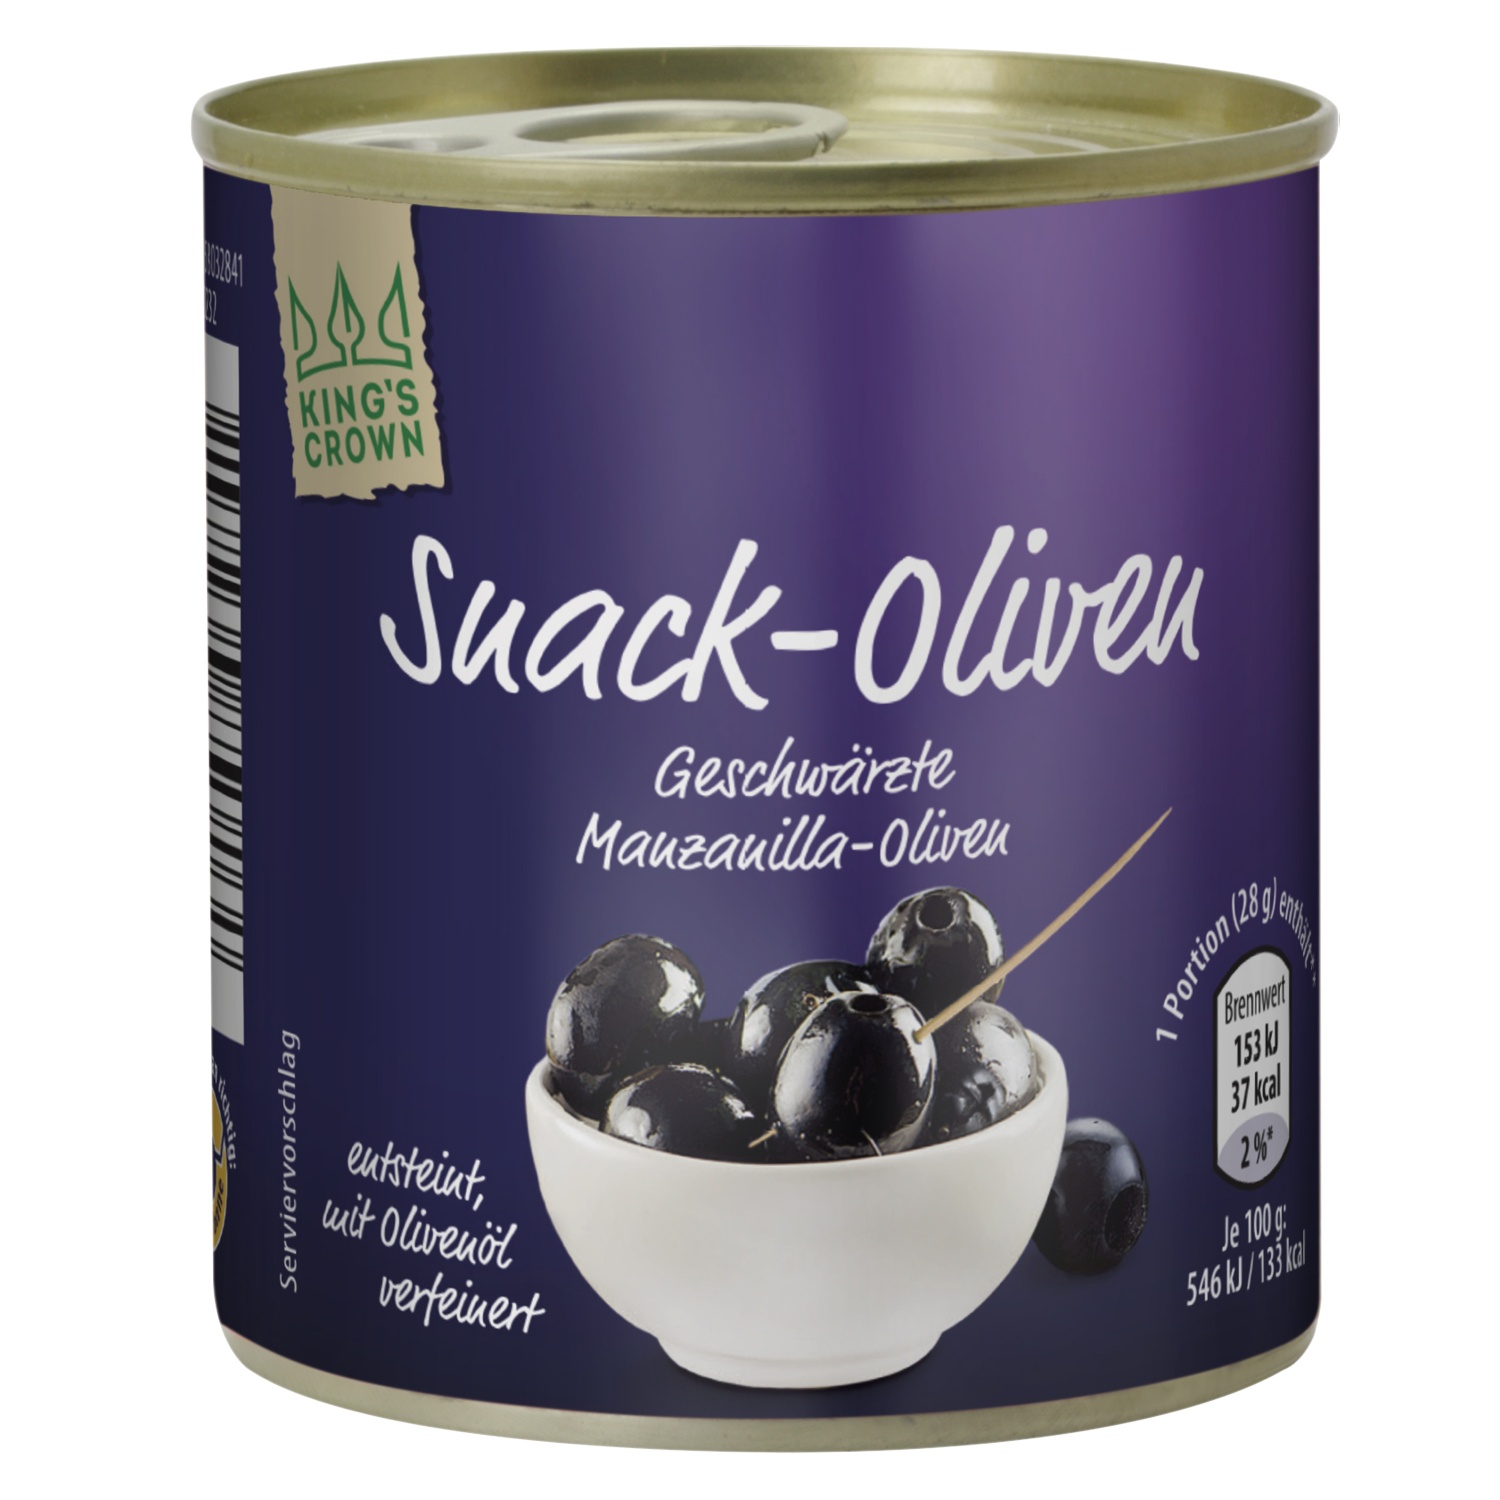 KING‘S CROWN Snack-Oliven 85 g